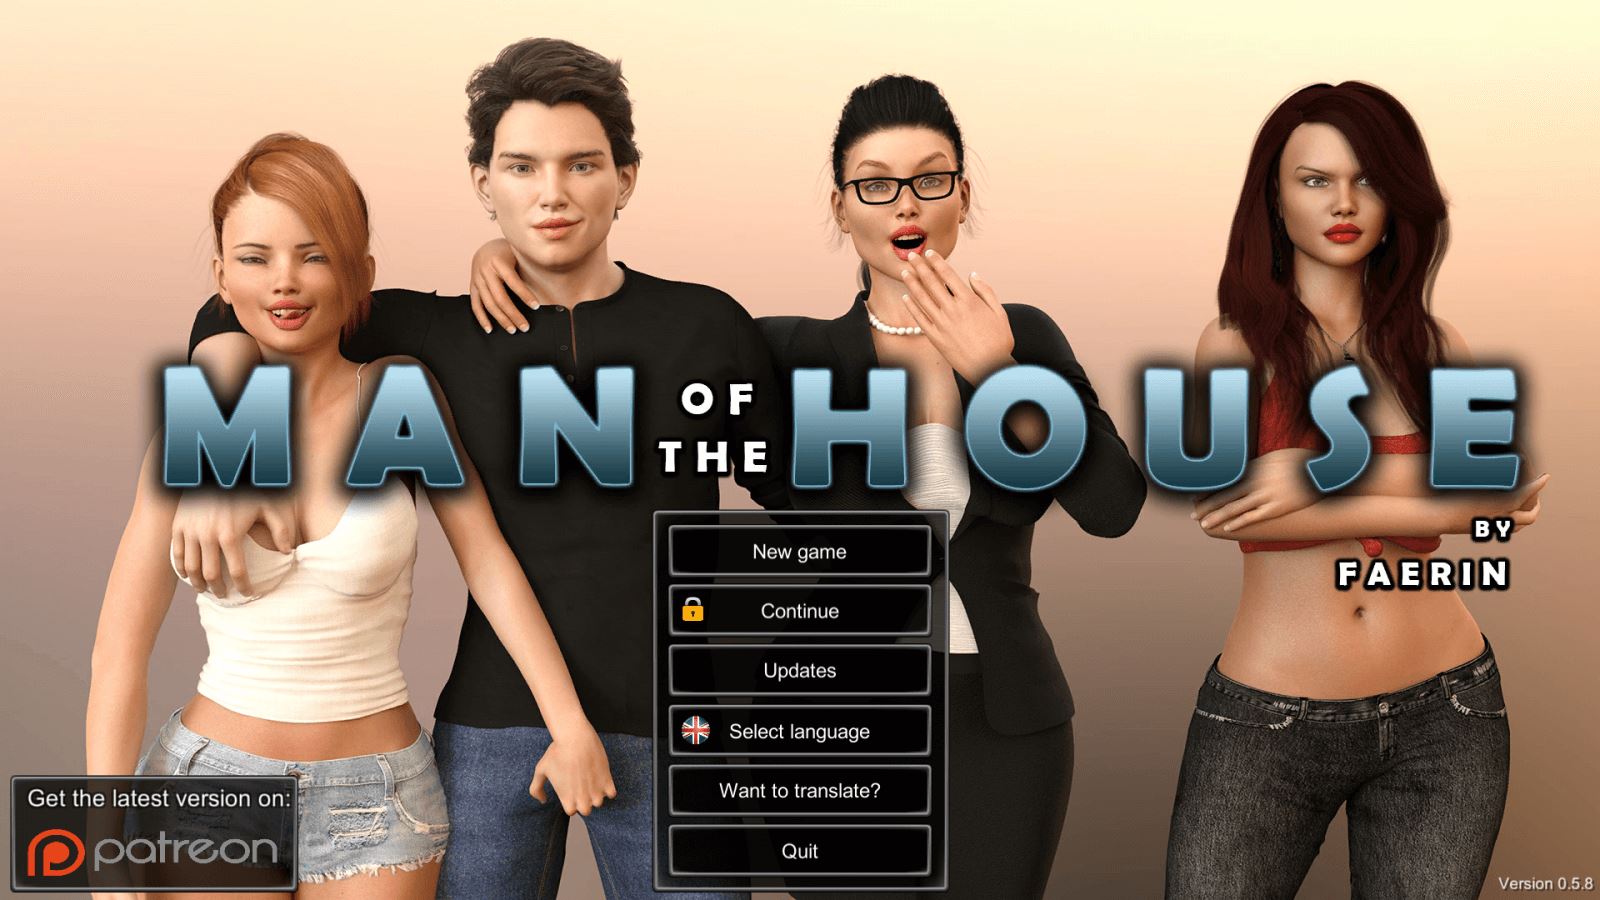 Man of the House Unity Porn Sex Game v.1.0.2c Extra Download for Windows